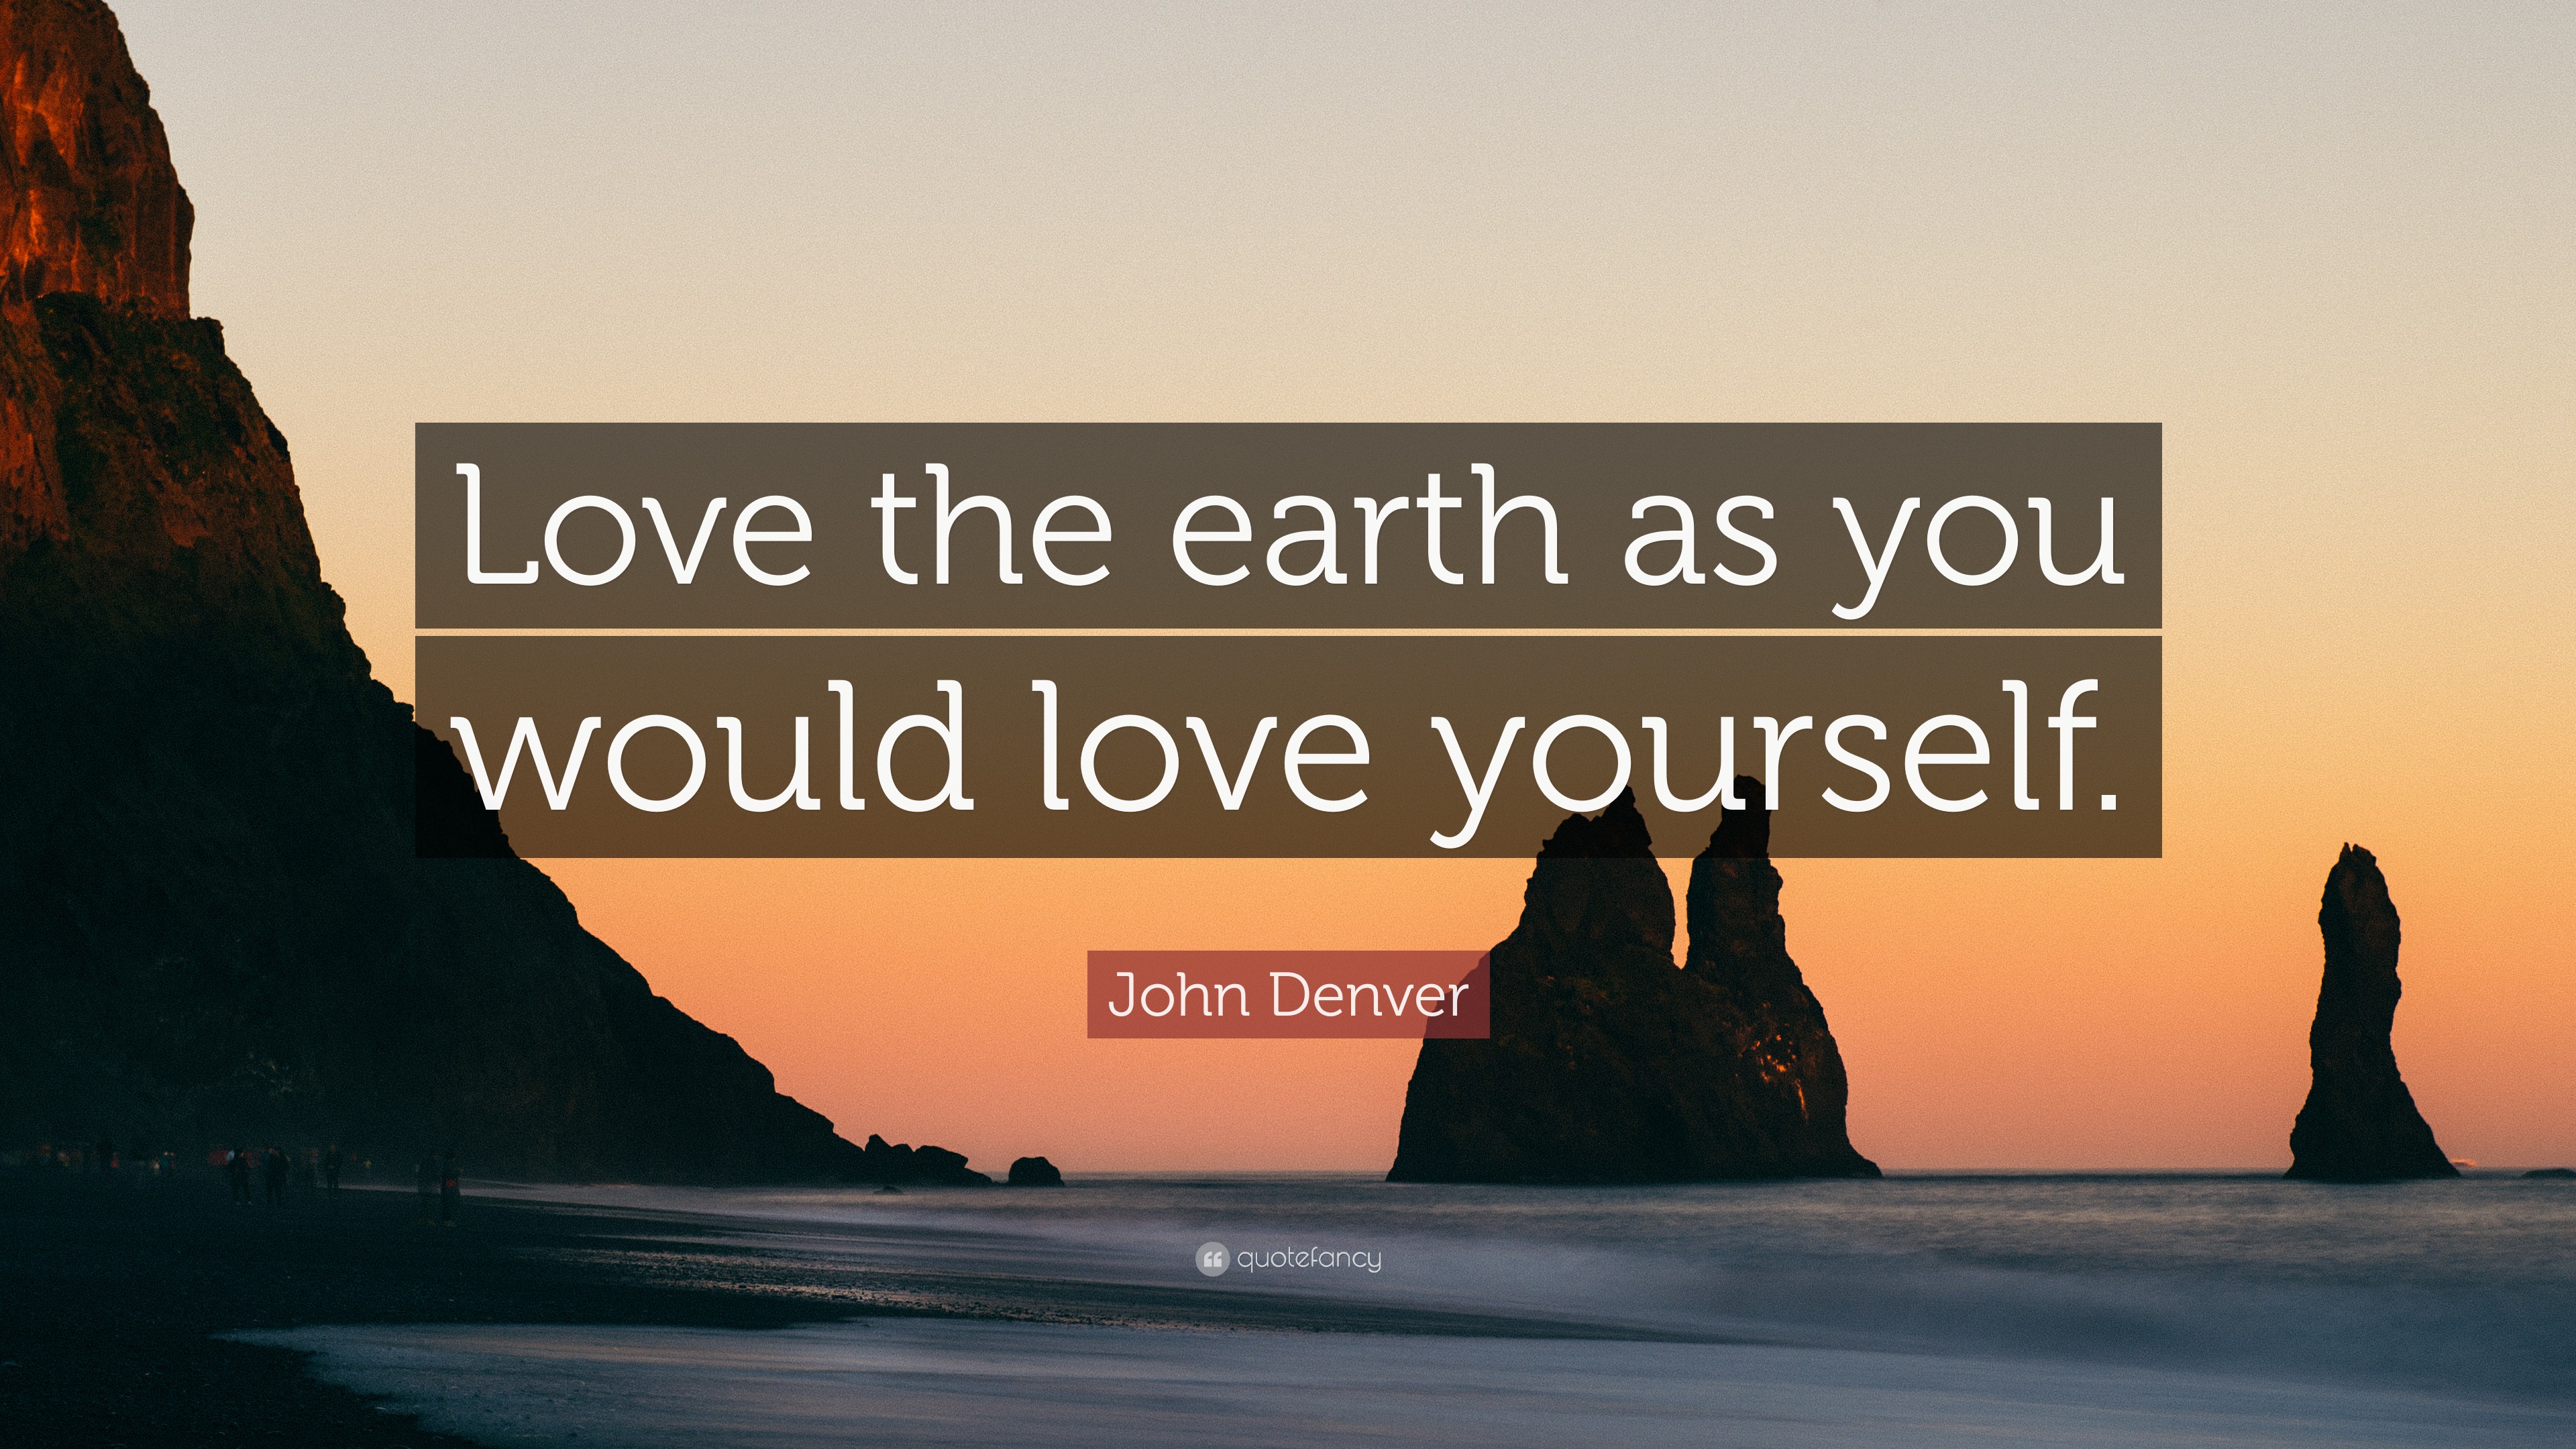 John Denver Quote “Love the earth as you would love yourself.” (9